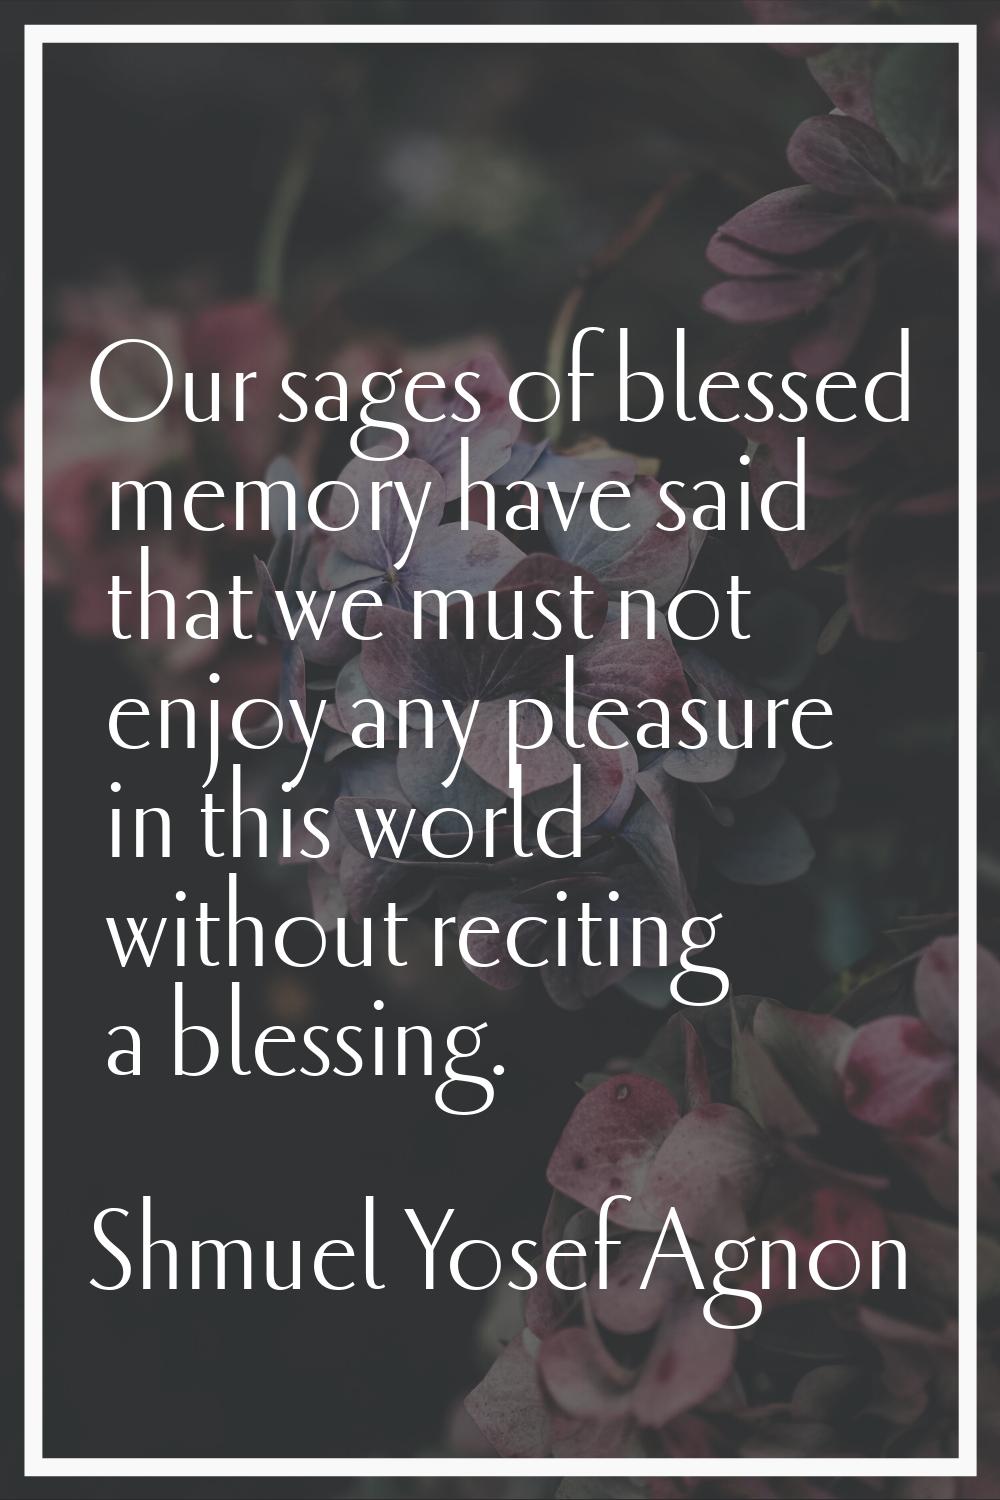 Our sages of blessed memory have said that we must not enjoy any pleasure in this world without rec